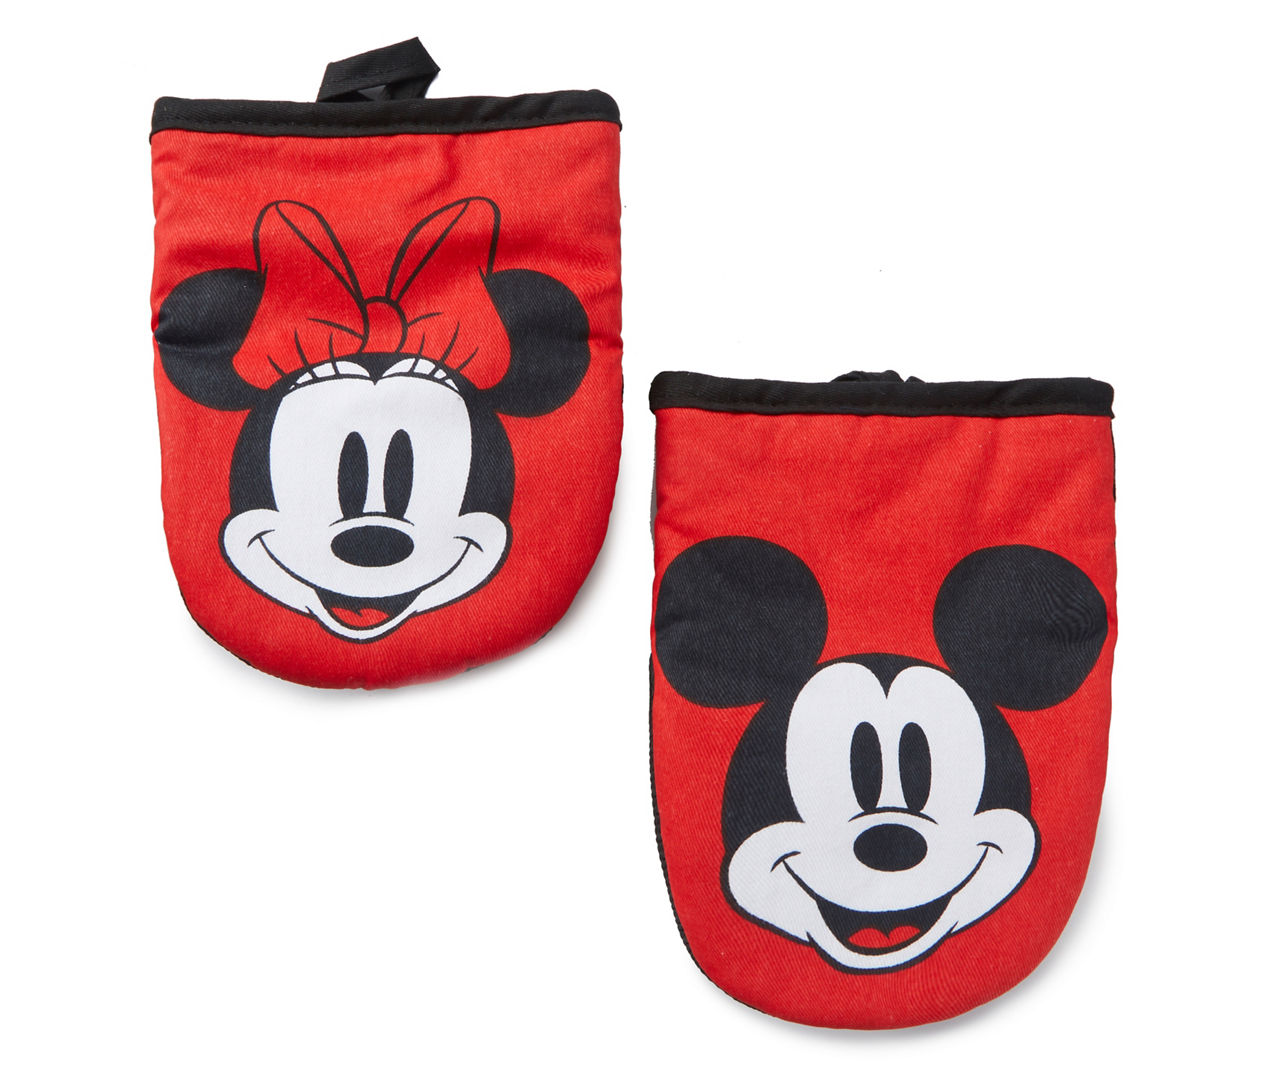 Disney Mickey Mouse and Minnie Mouse Christmas Mini Oven Mitts, 2-Count